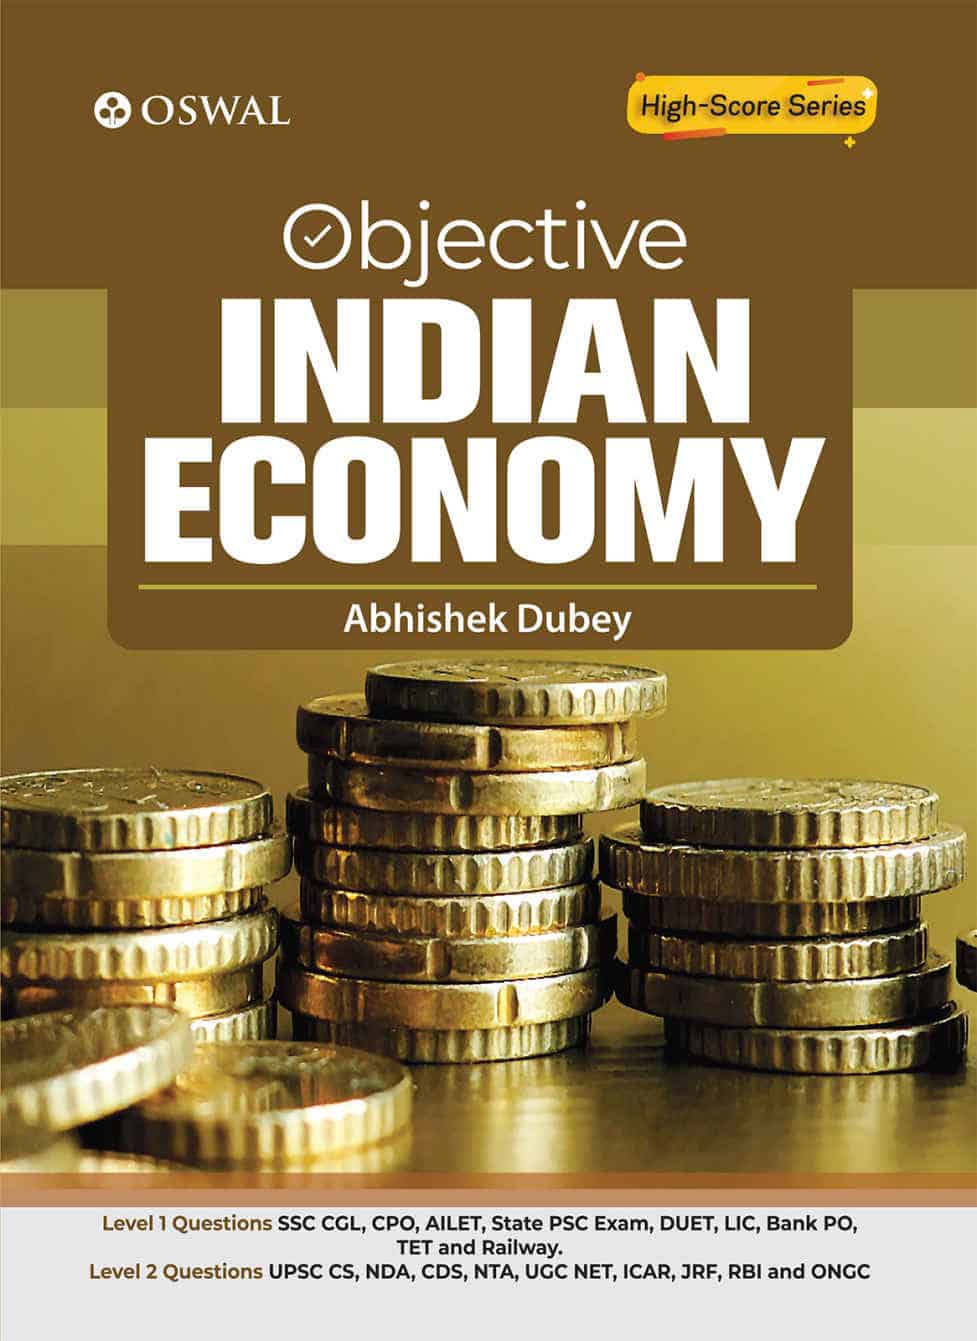 Objective Indian Economy by Abhisek Dubey - Oswaal